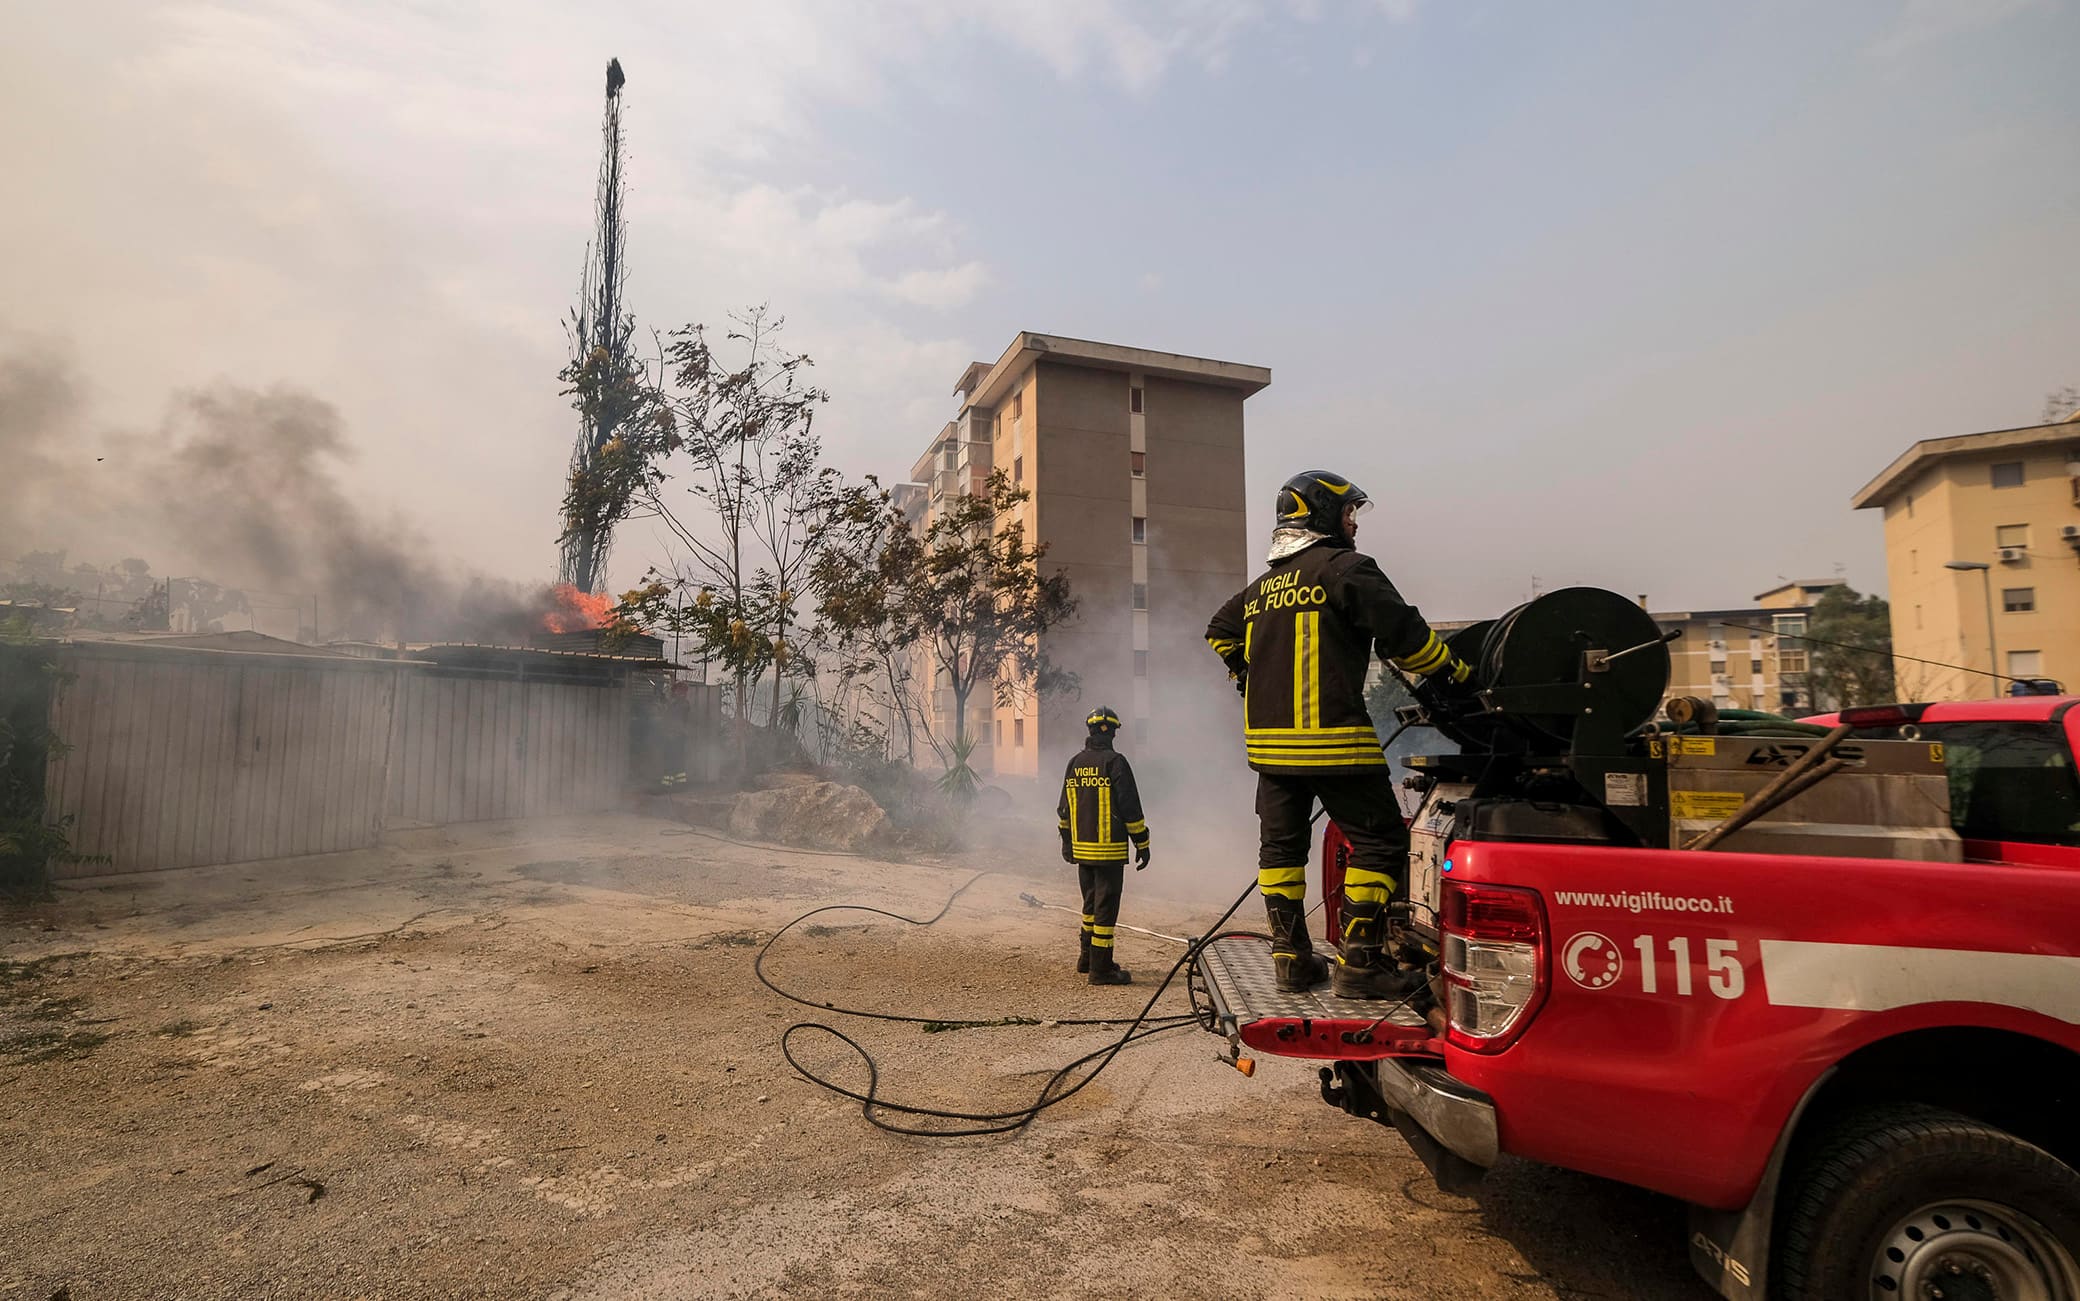 The fire that broke out in the Borgo Nuovo district licks the houses, in Palermo, Sicily island, southern Italy, 18 August 2022. ANSA / IGOR PETYX